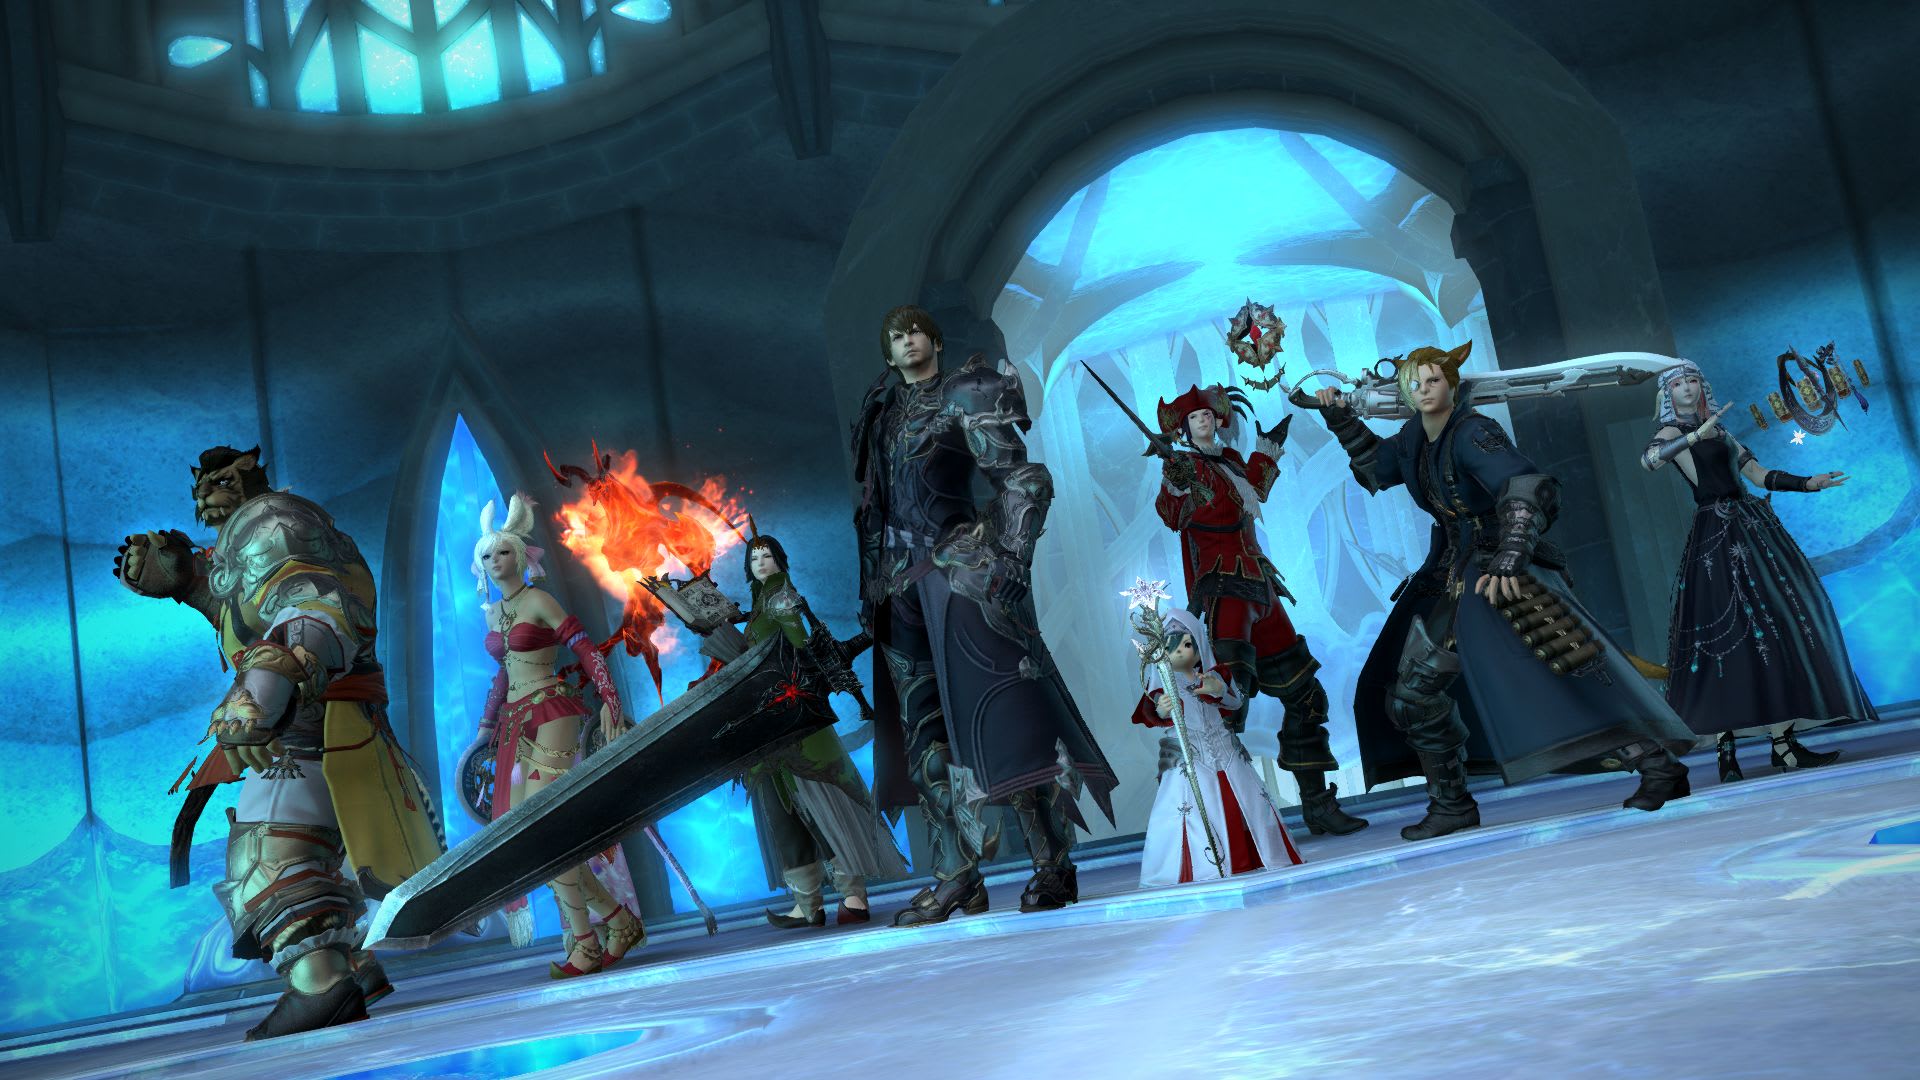 Final Fantasy 14 screenshot showing a party of heroes.